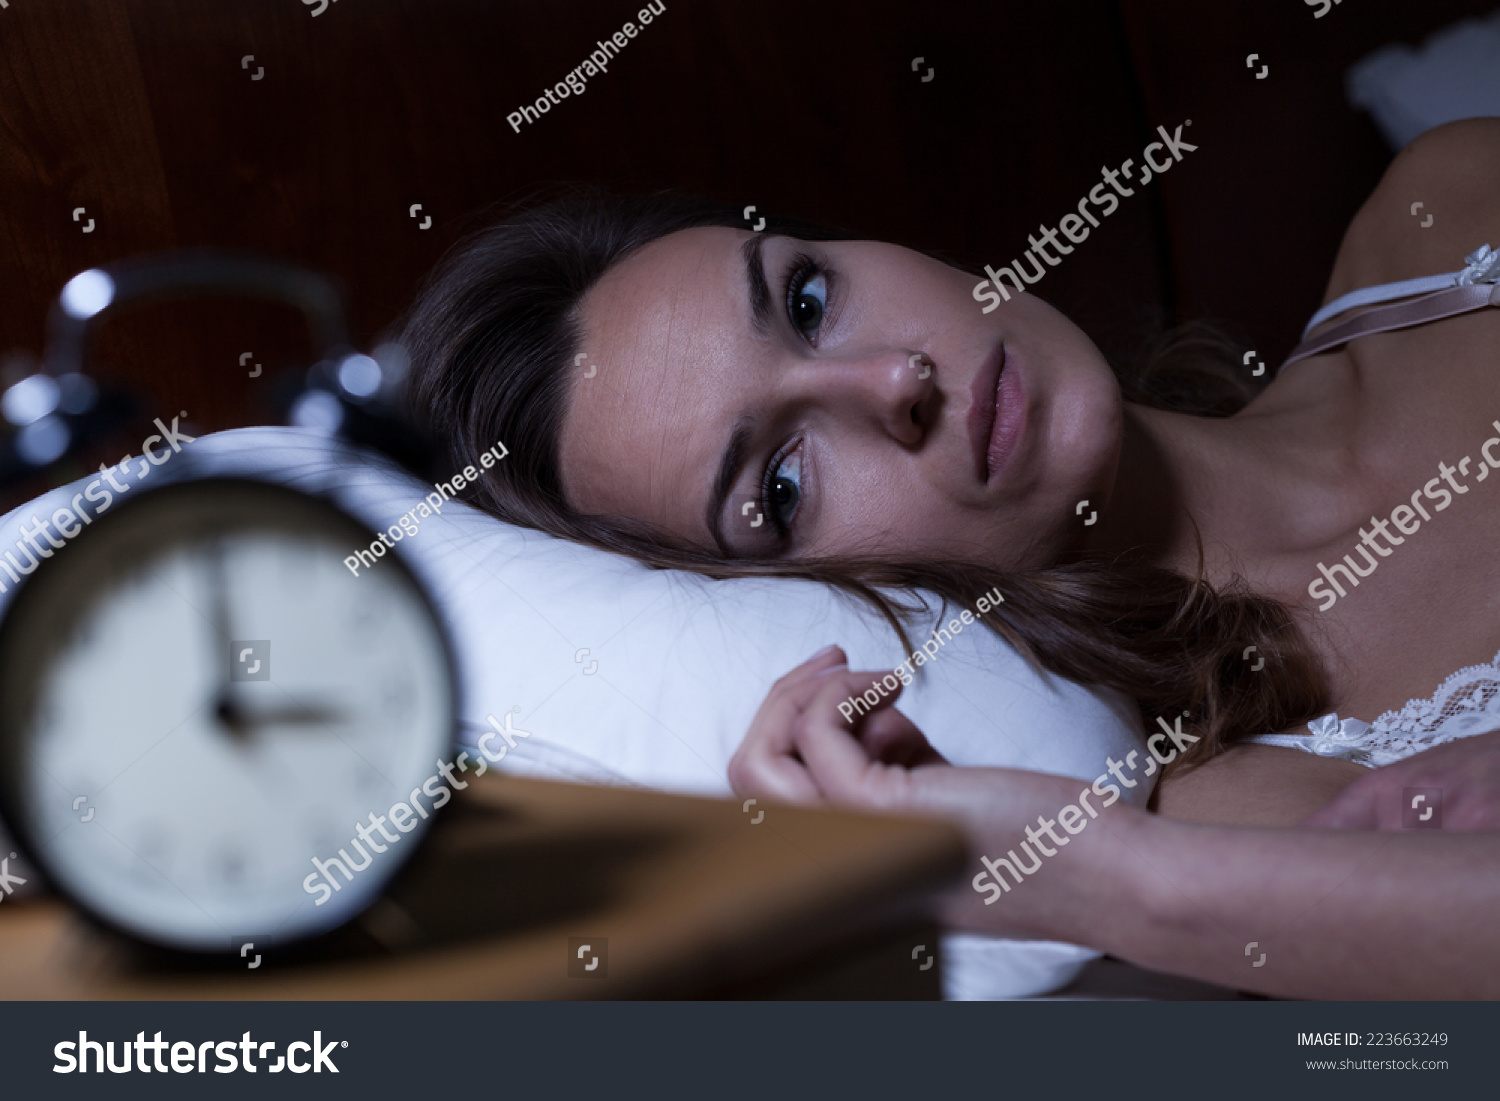 Woman lying in bed suffering from insomnia #223663249